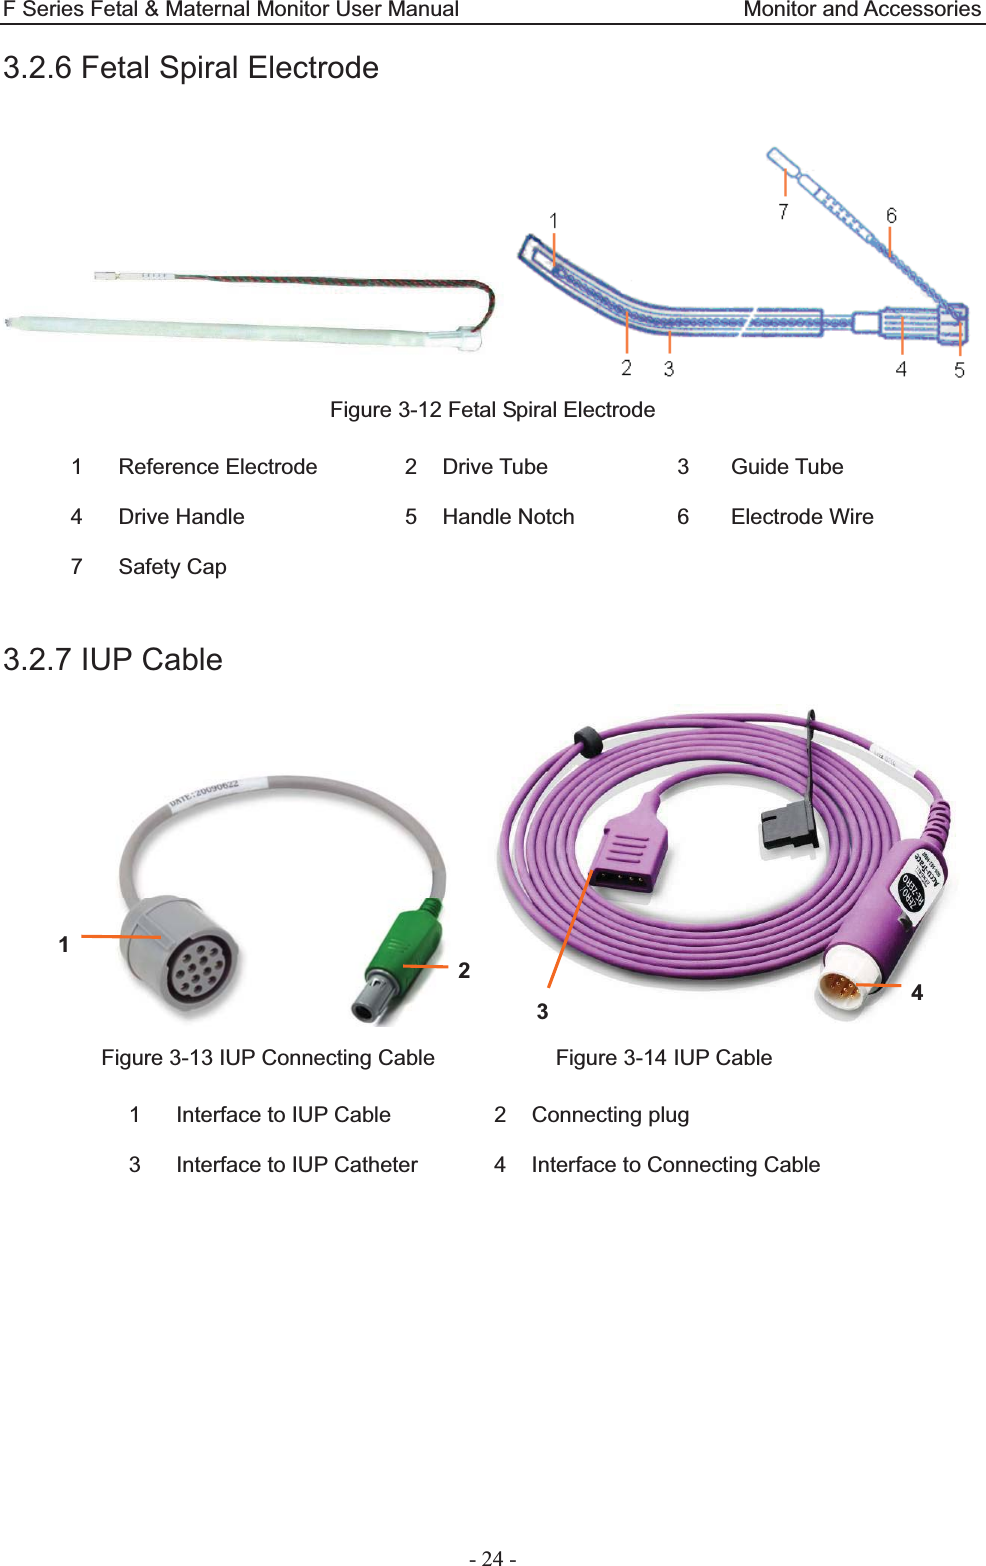 F Series Fetal &amp; Maternal Monitor User Manual                          Monitor and Accessories - 24 - 3.2.6 Fetal Spiral Electrode     Figure 3-12 Fetal Spiral Electrode 1  Reference Electrode  2 Drive Tube  3  Guide Tube 4  Drive Handle  5 Handle Notch  6  Electrode Wire 7 Safety Cap         3.2.7 IUP Cable      Figure 3-13 IUP Connecting Cable           Figure 3-14 IUP Cable 1  Interface to IUP Cable  2 Connecting plug 3  Interface to IUP Catheter  4 Interface to Connecting Cable        1234